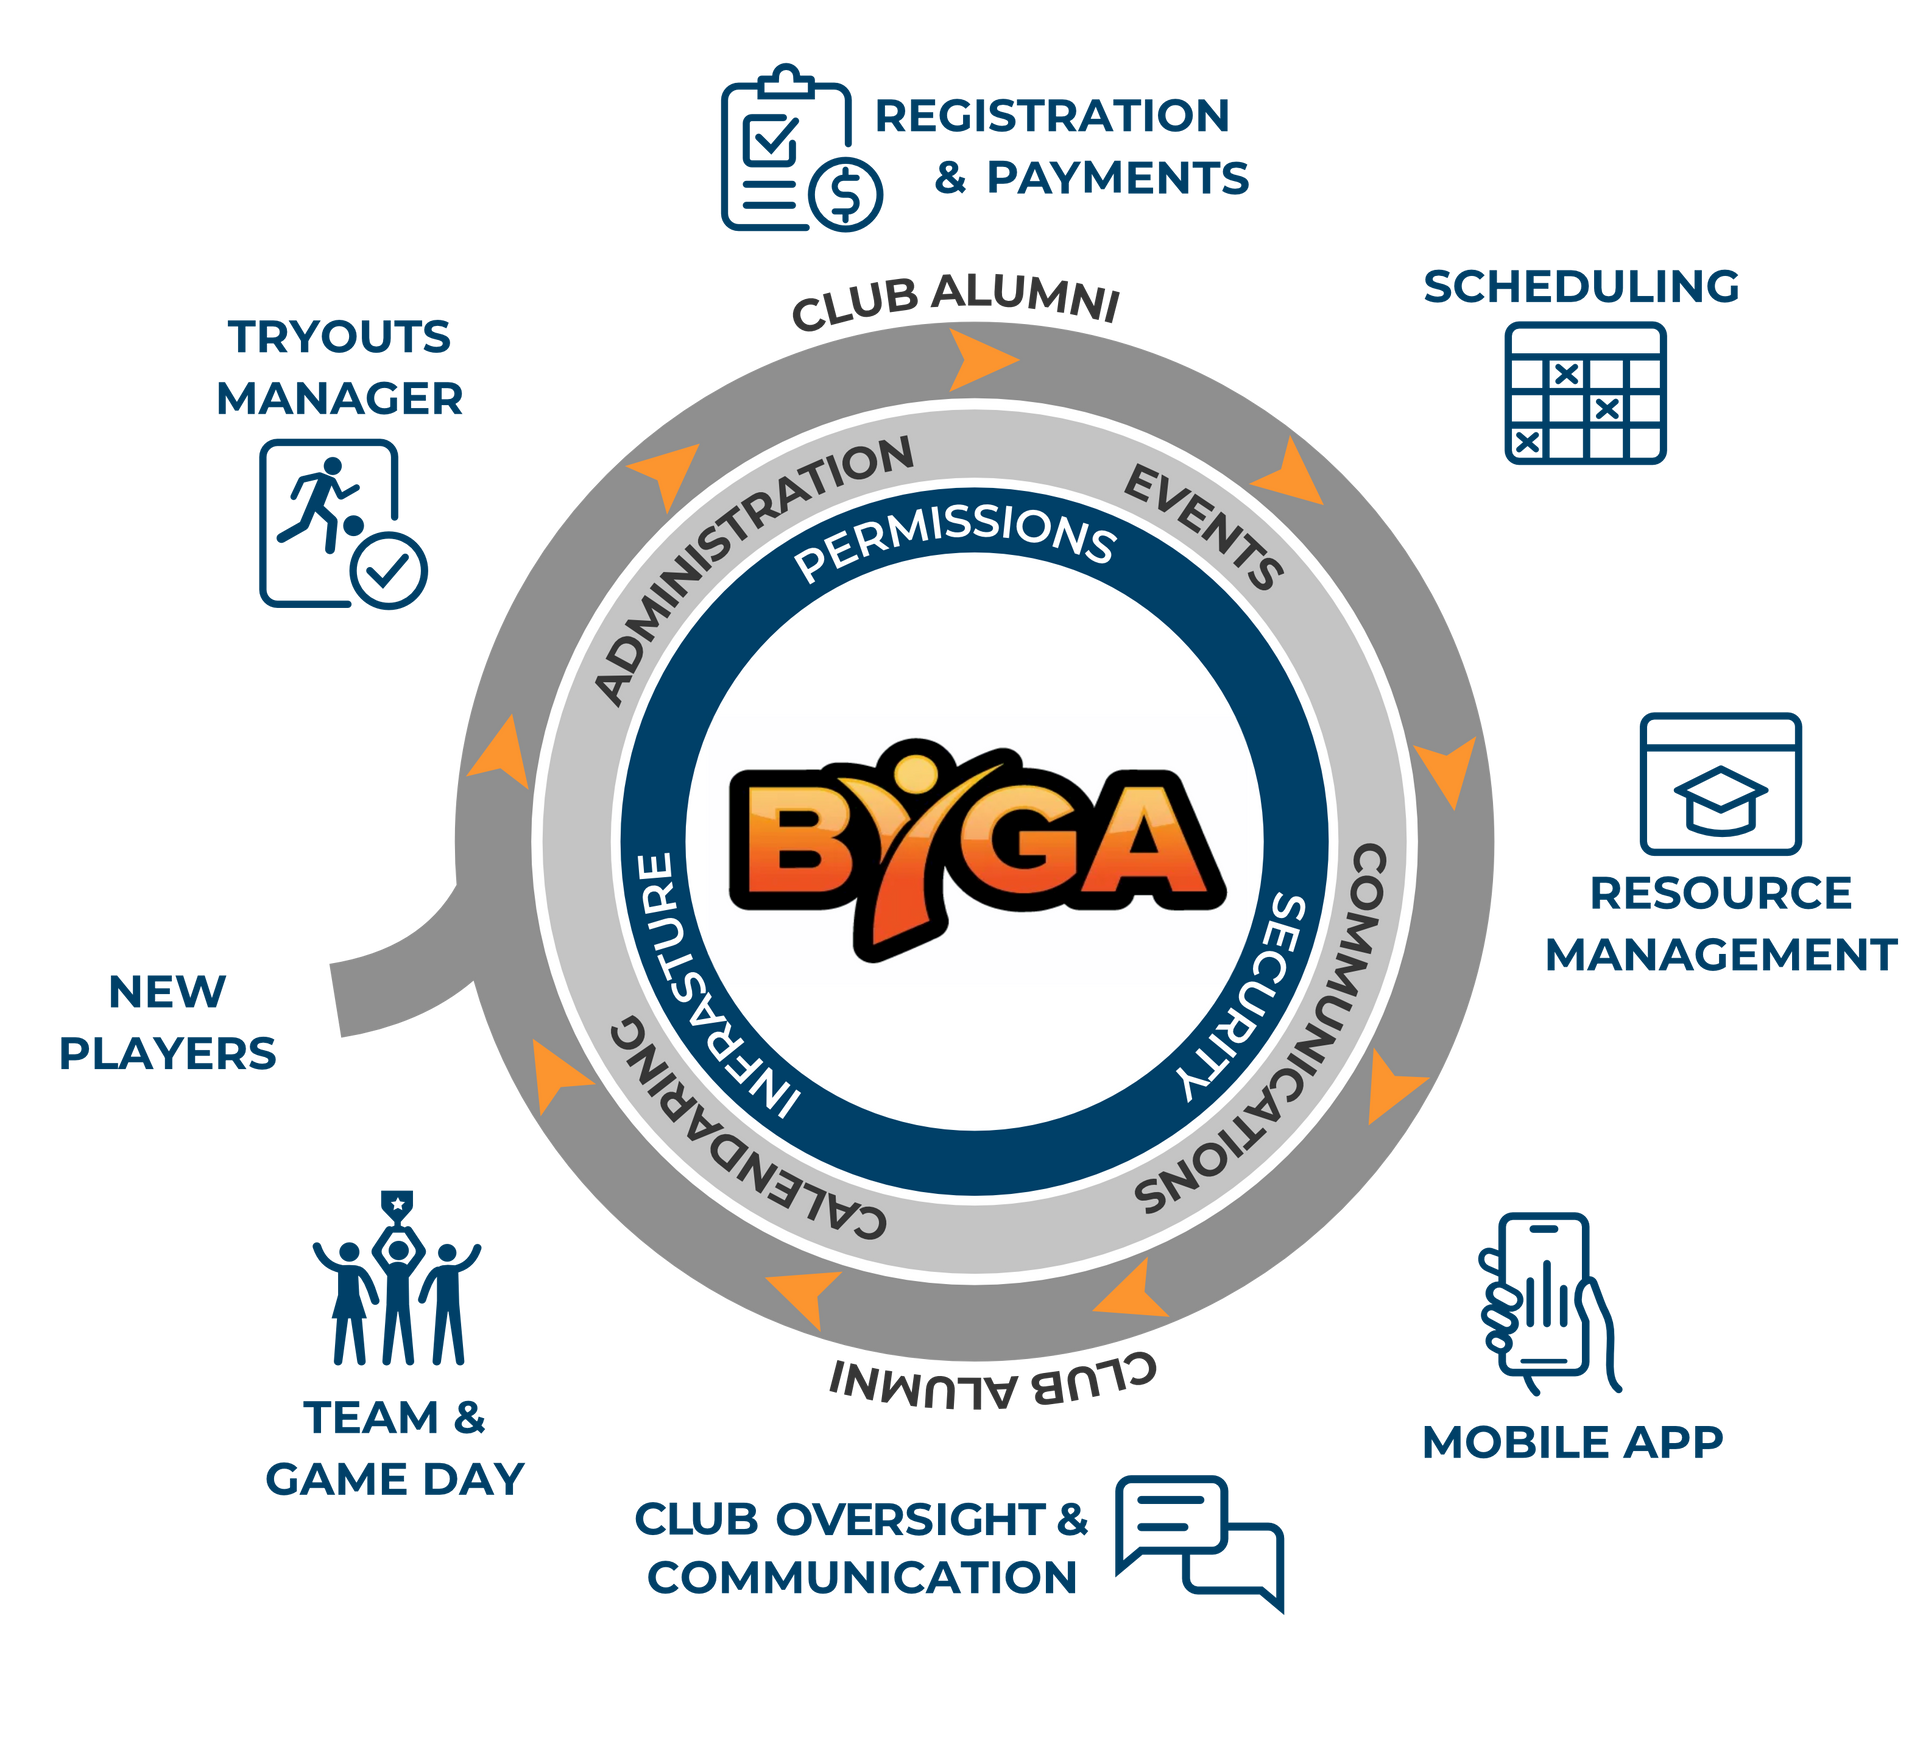 Byga youth sports club management wheel showing features including tryouts, teams, registration, calendars, fields, evaluations, profiles, results, and more